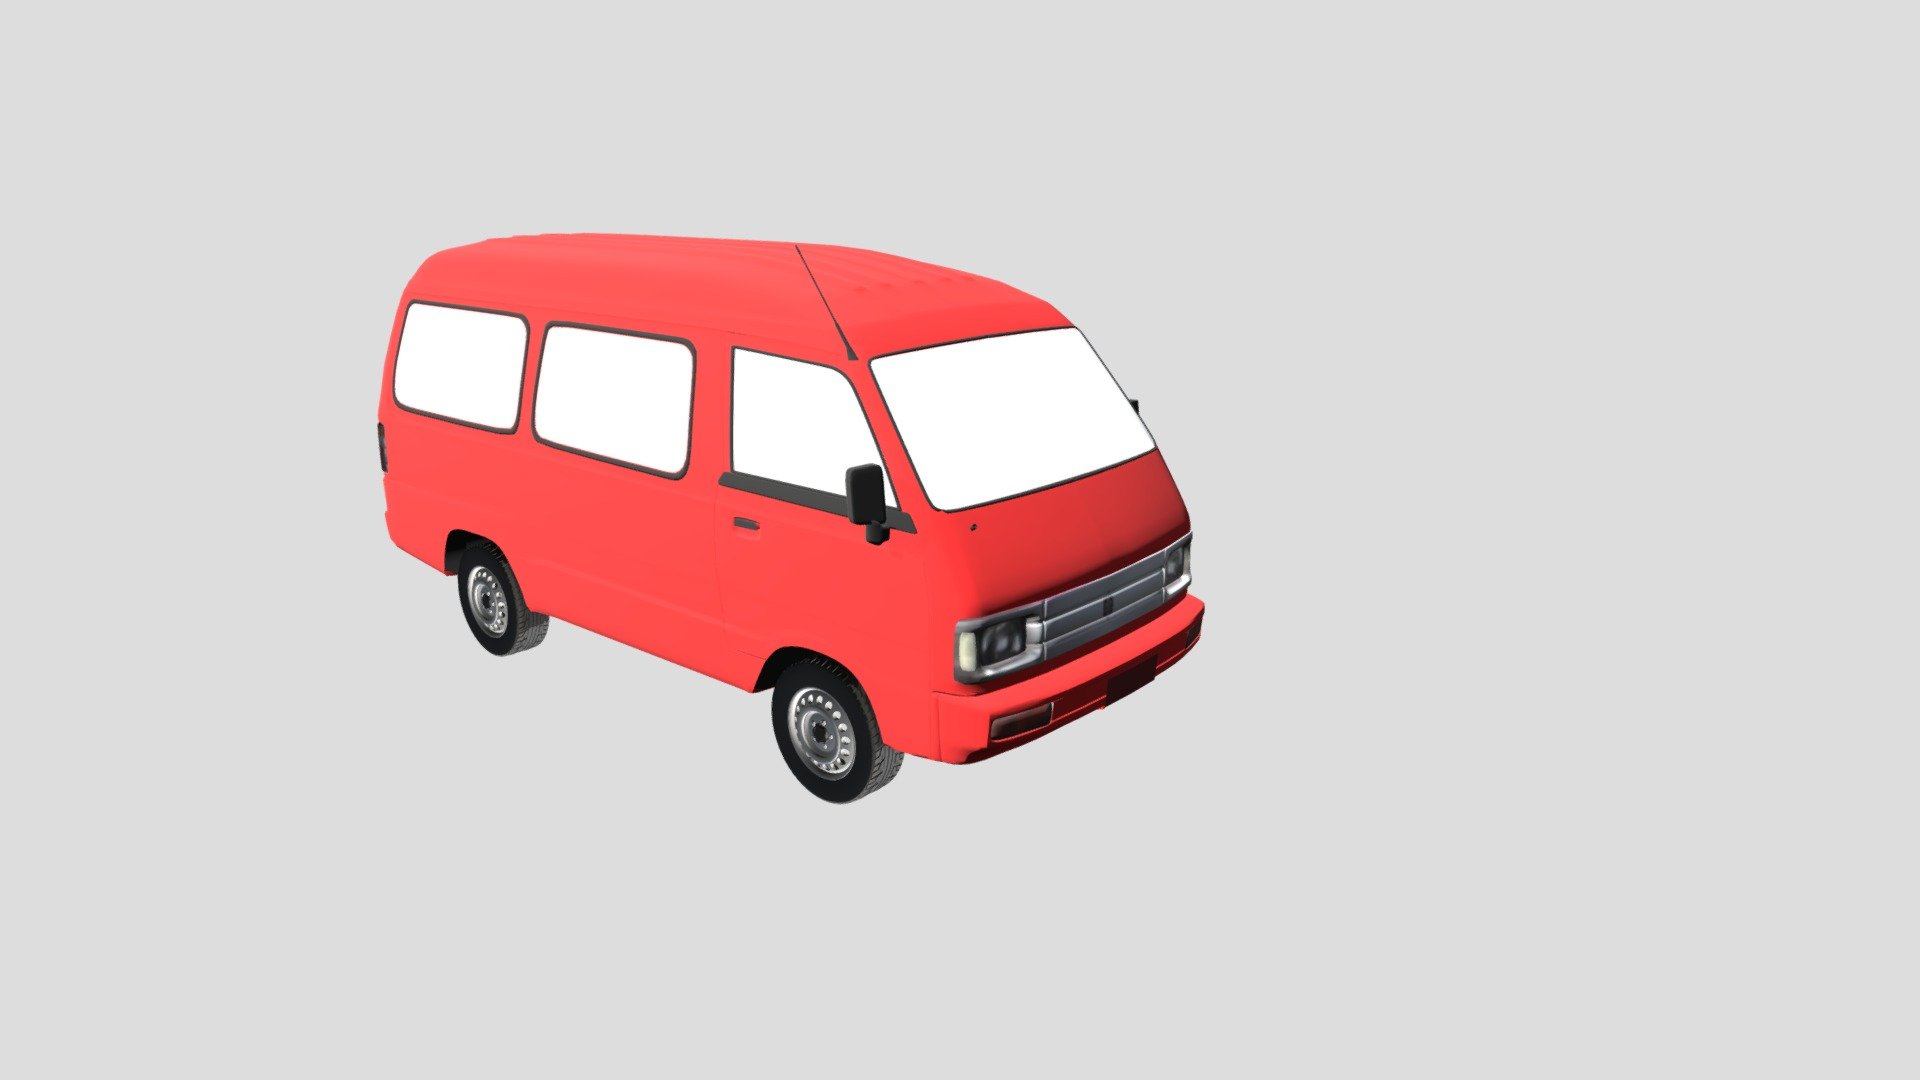 Angkot Indonesia Vibes 2000an Suzuki Carry 1.0 - Angkot Carry 1.0 - 3D model by Muhammad Danial Abbasy (@m.danialabbasy) 3d model